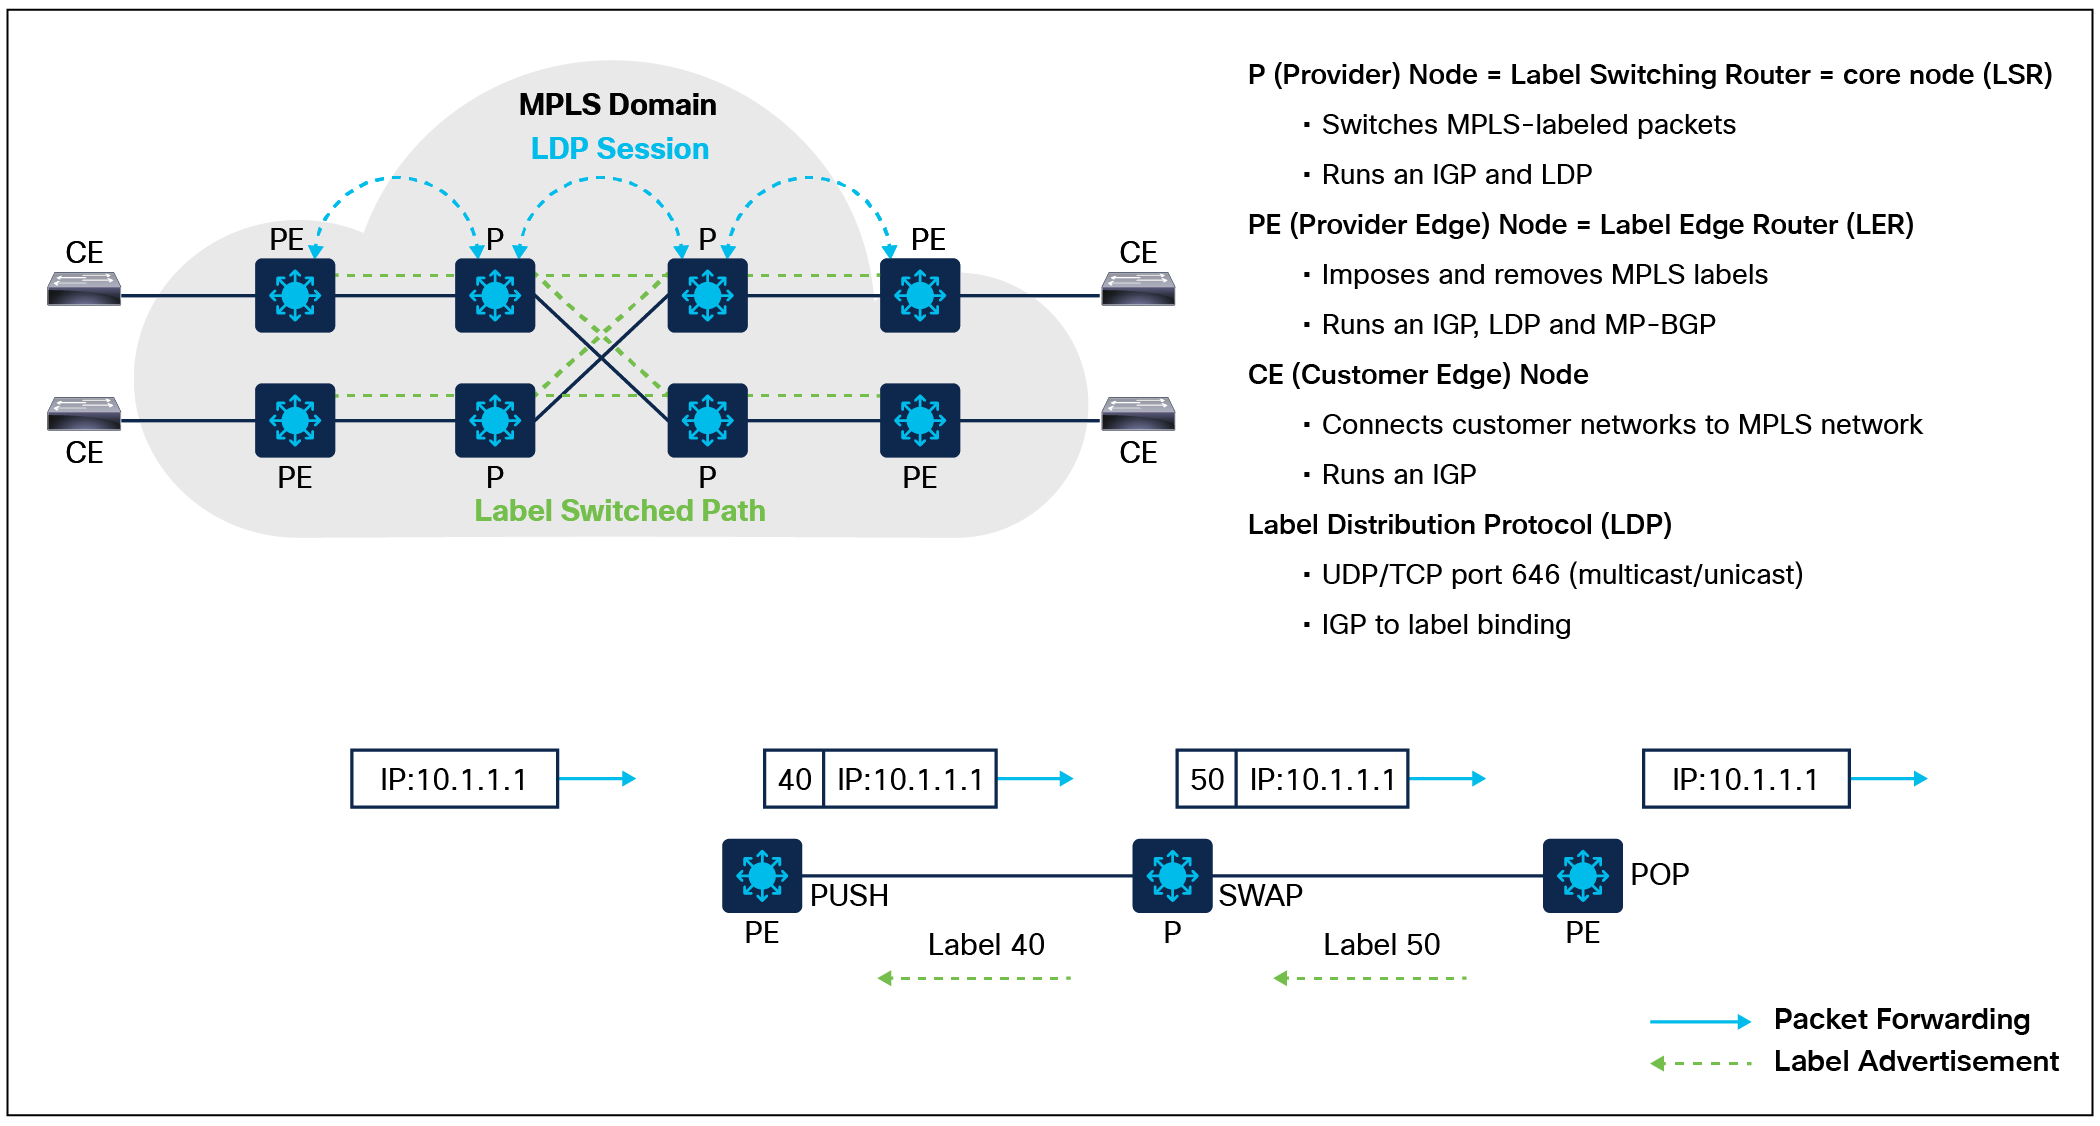 Illustrates the operation of devices within the MPLS network